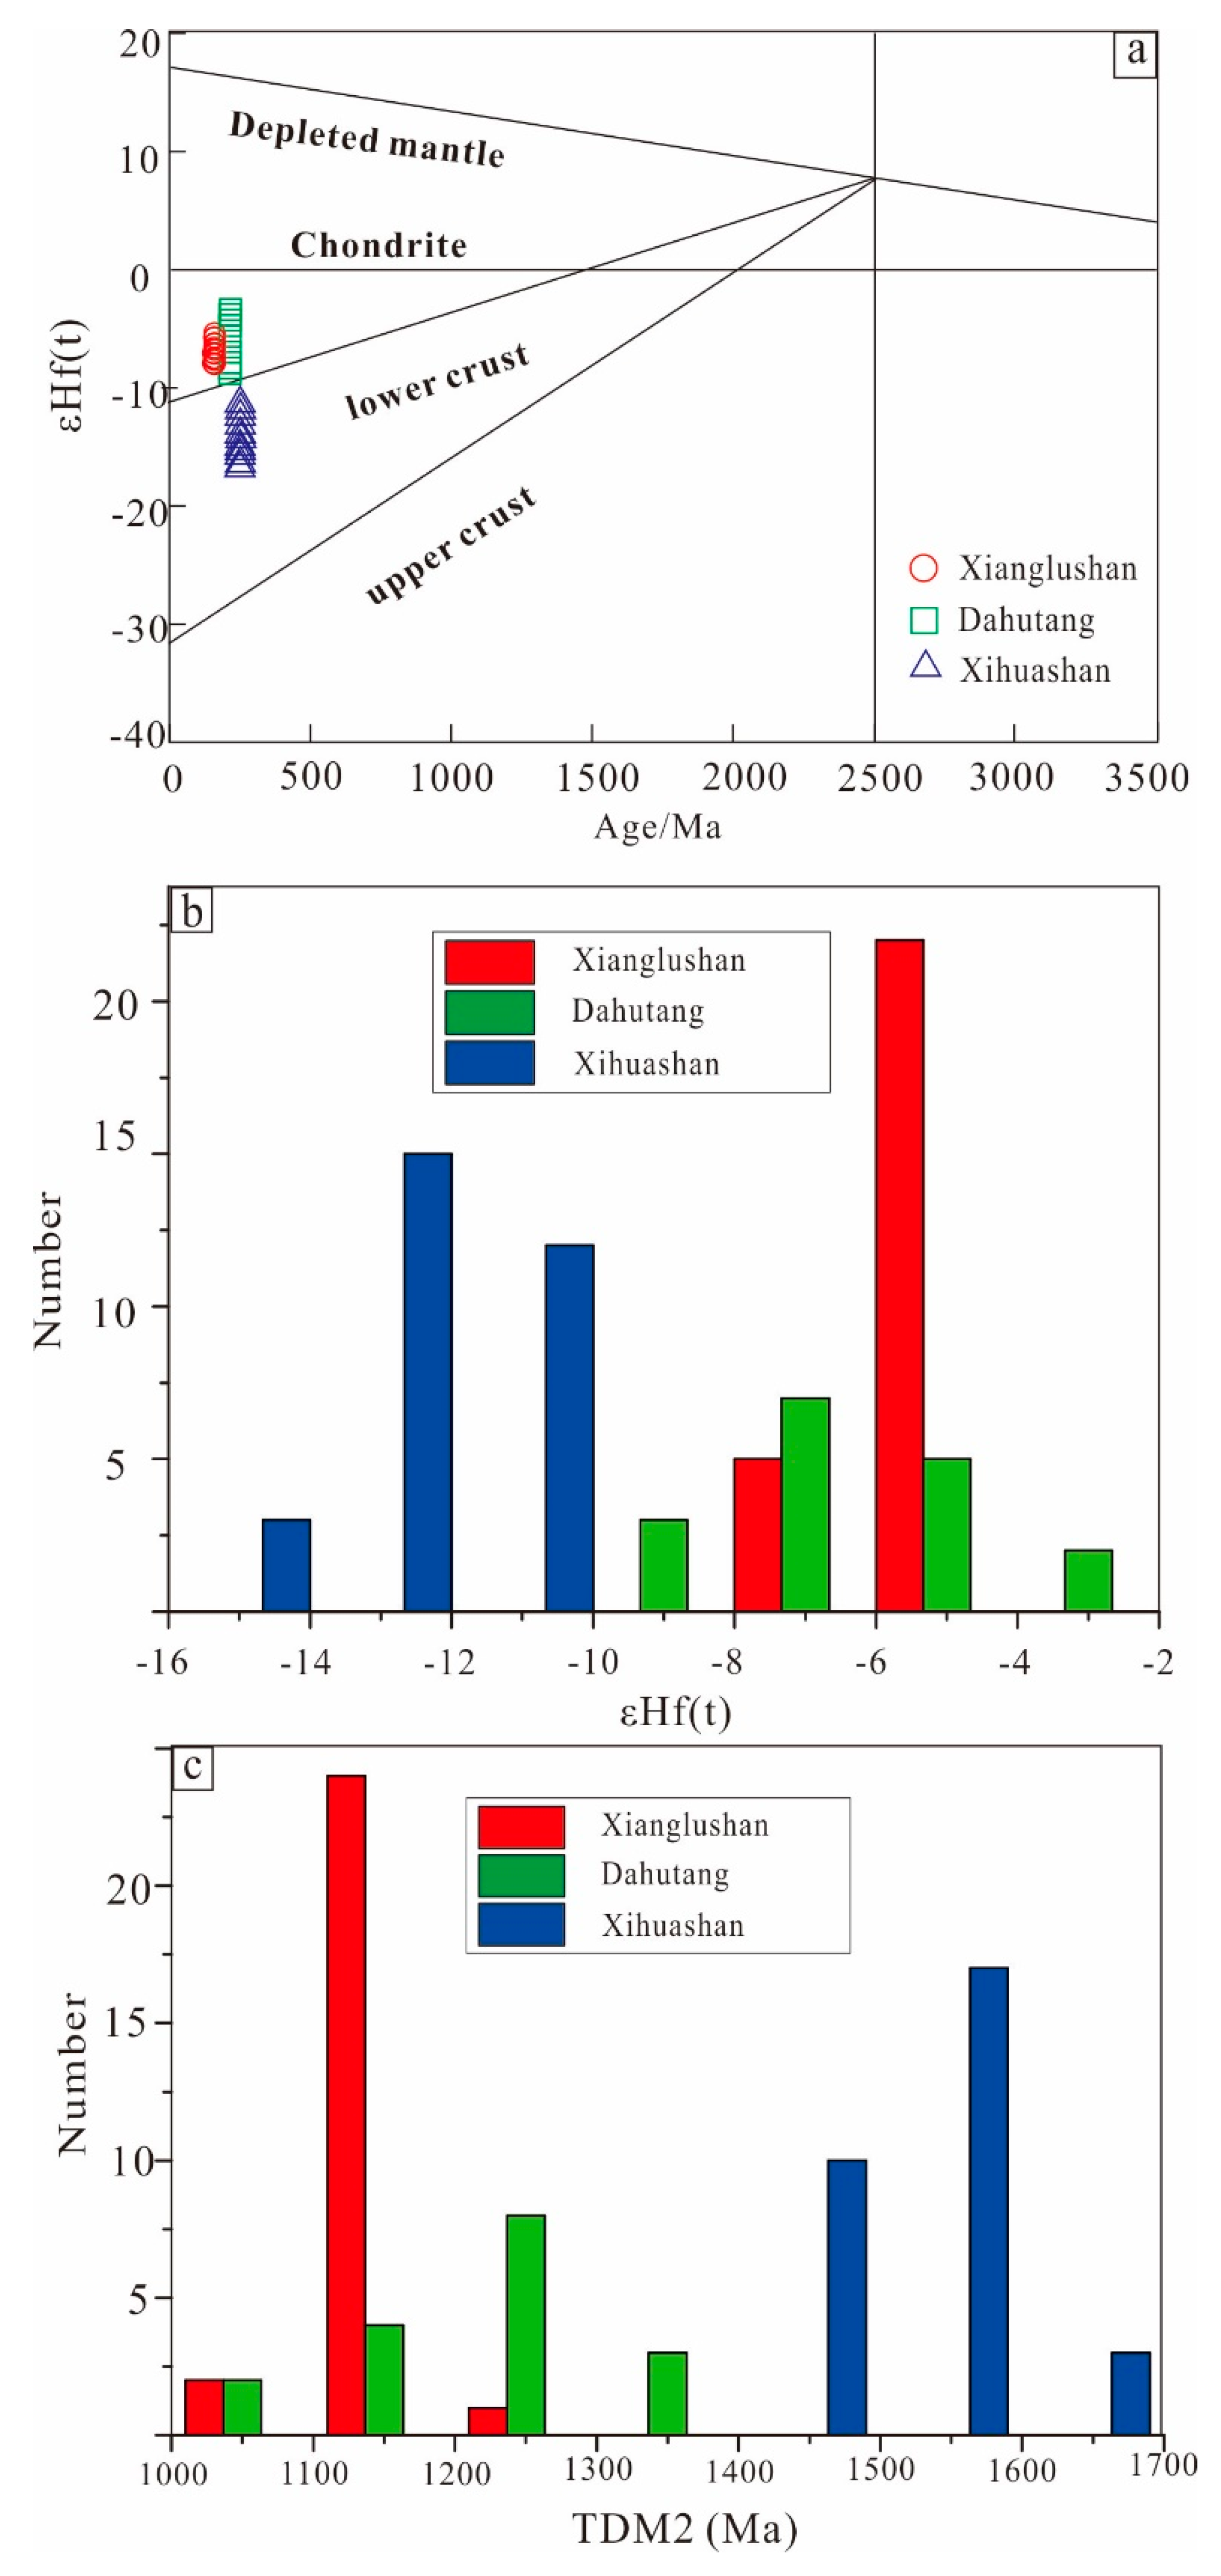 Minerals | Free Full-Text | Comparison of Magma Oxygen Fugacity and Zircon  Hf Isotopes between Xianglushan Tungsten-Bearing Granite and Late  Yanshanian Granites in Jiangxi Province, South China | HTML